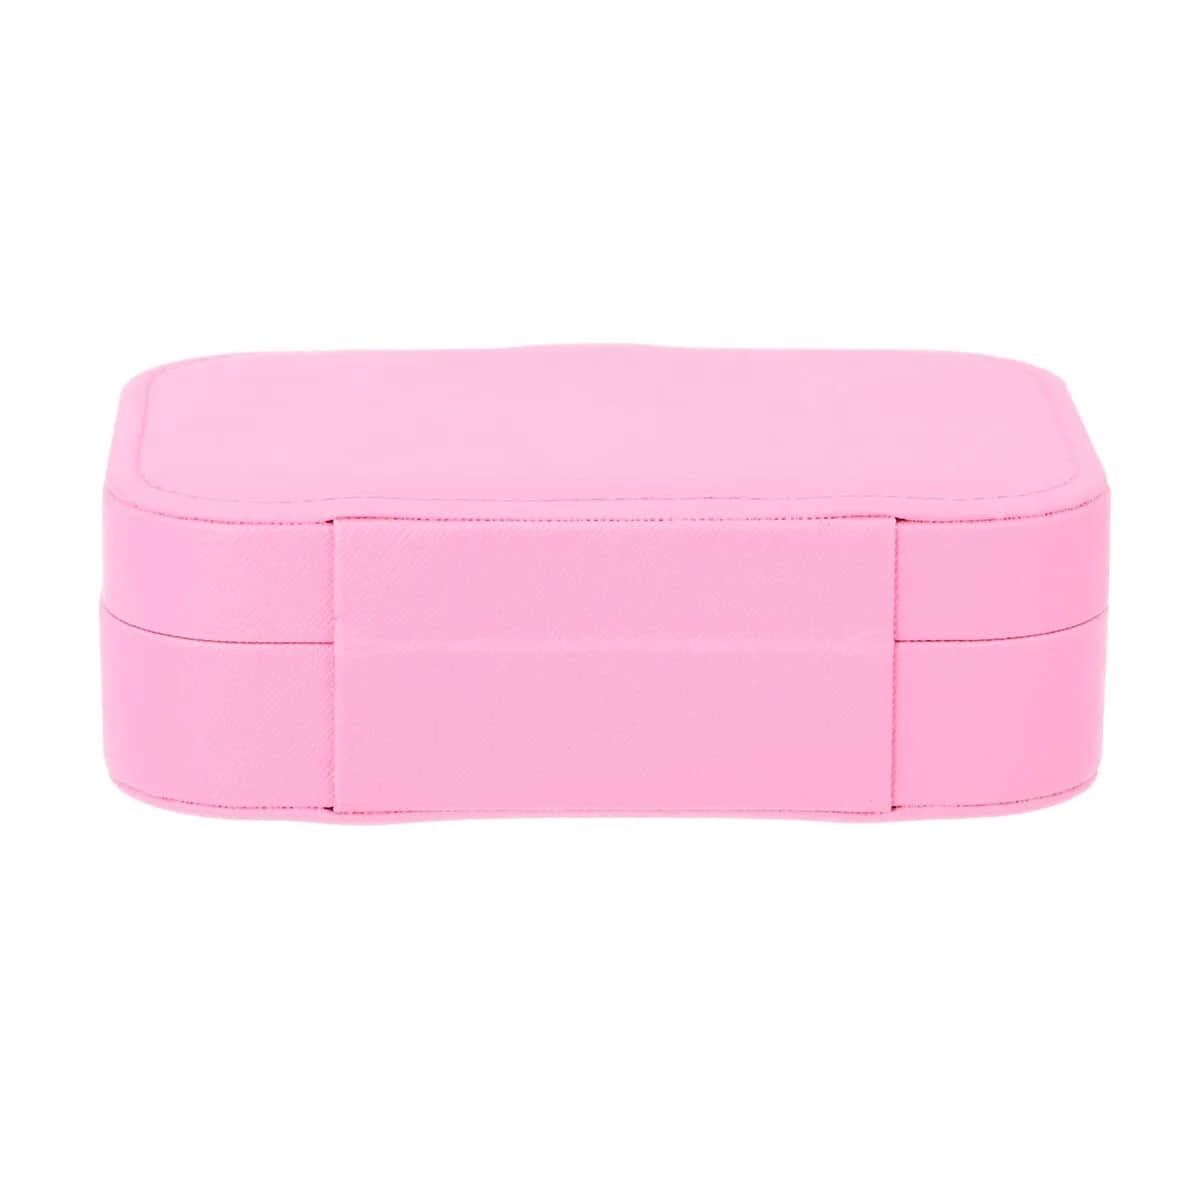 Pink Faux Leather Jewelry Organizer with Button Closure (6.49"x4.53"x2.17") image number 5